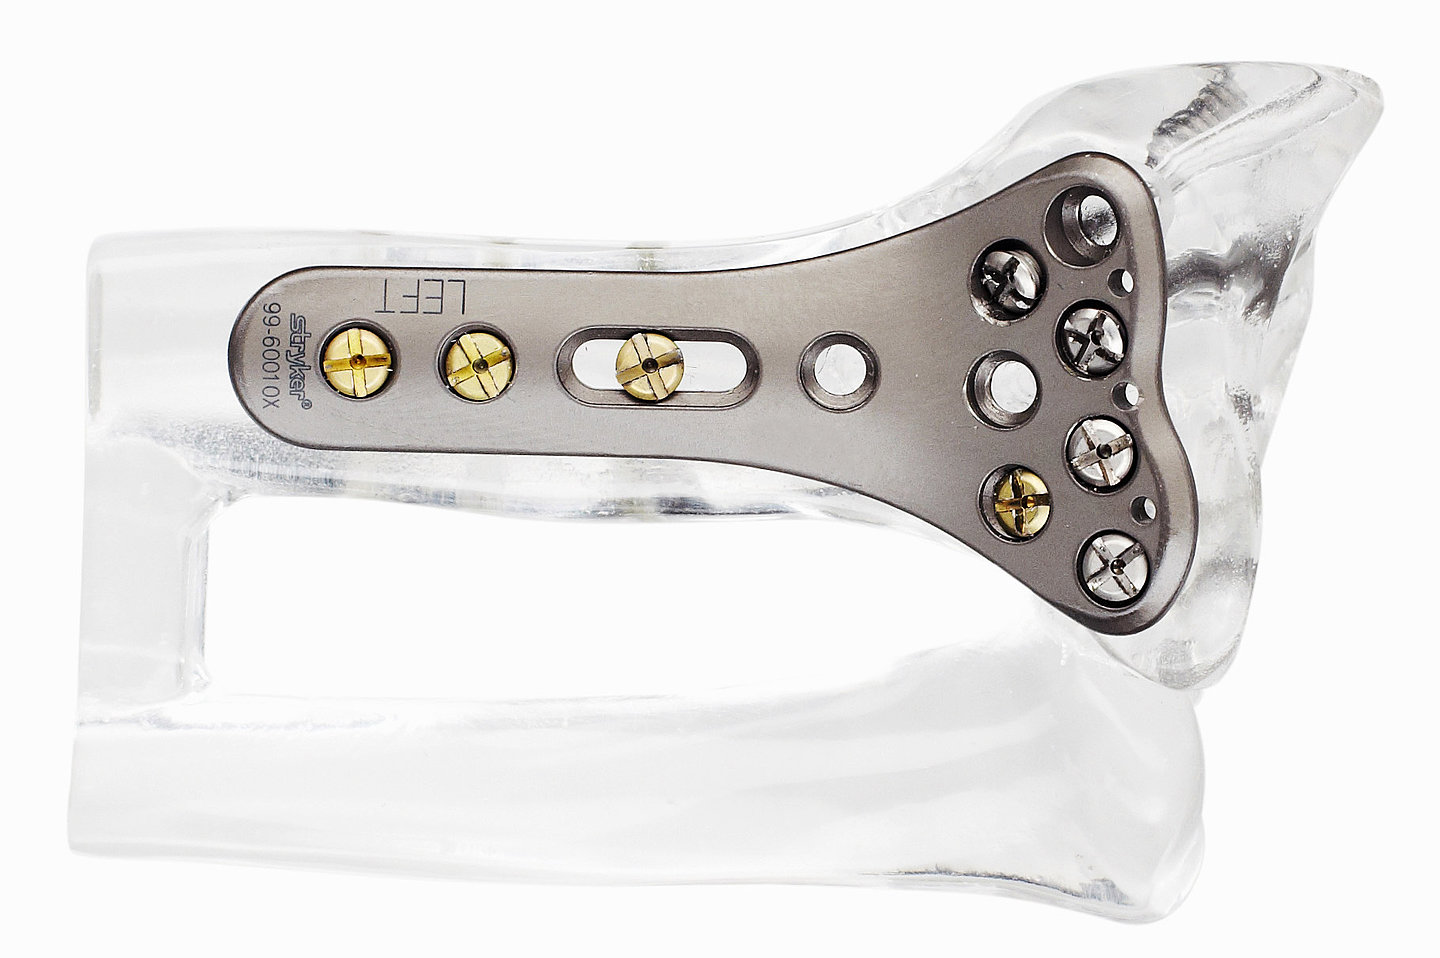 Stryker uses BLUM measuring systems in the production of medical implants